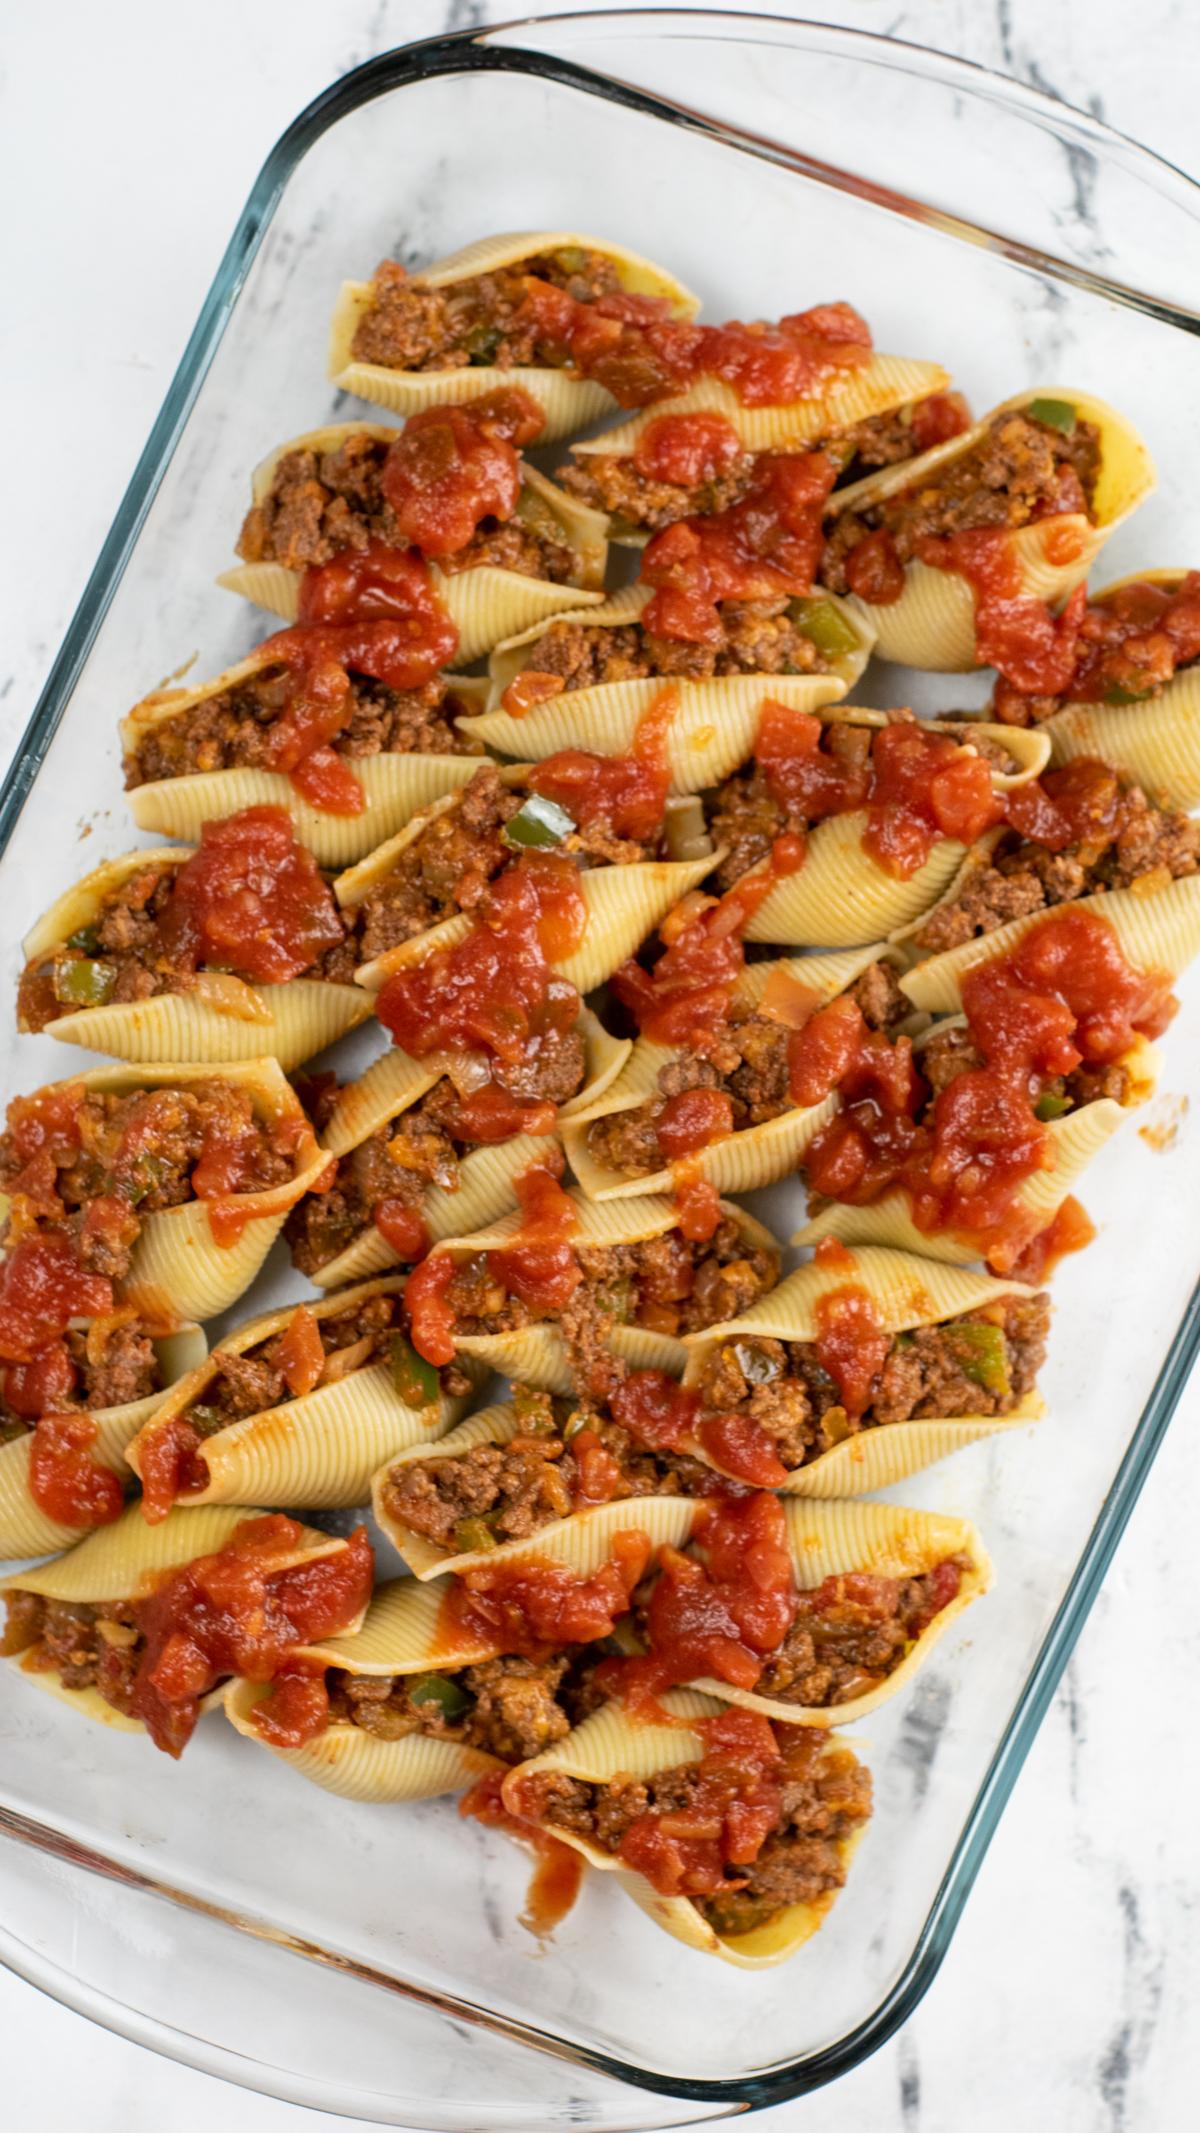 Filled shells with meat and drizzled with salsa in casserole dish.